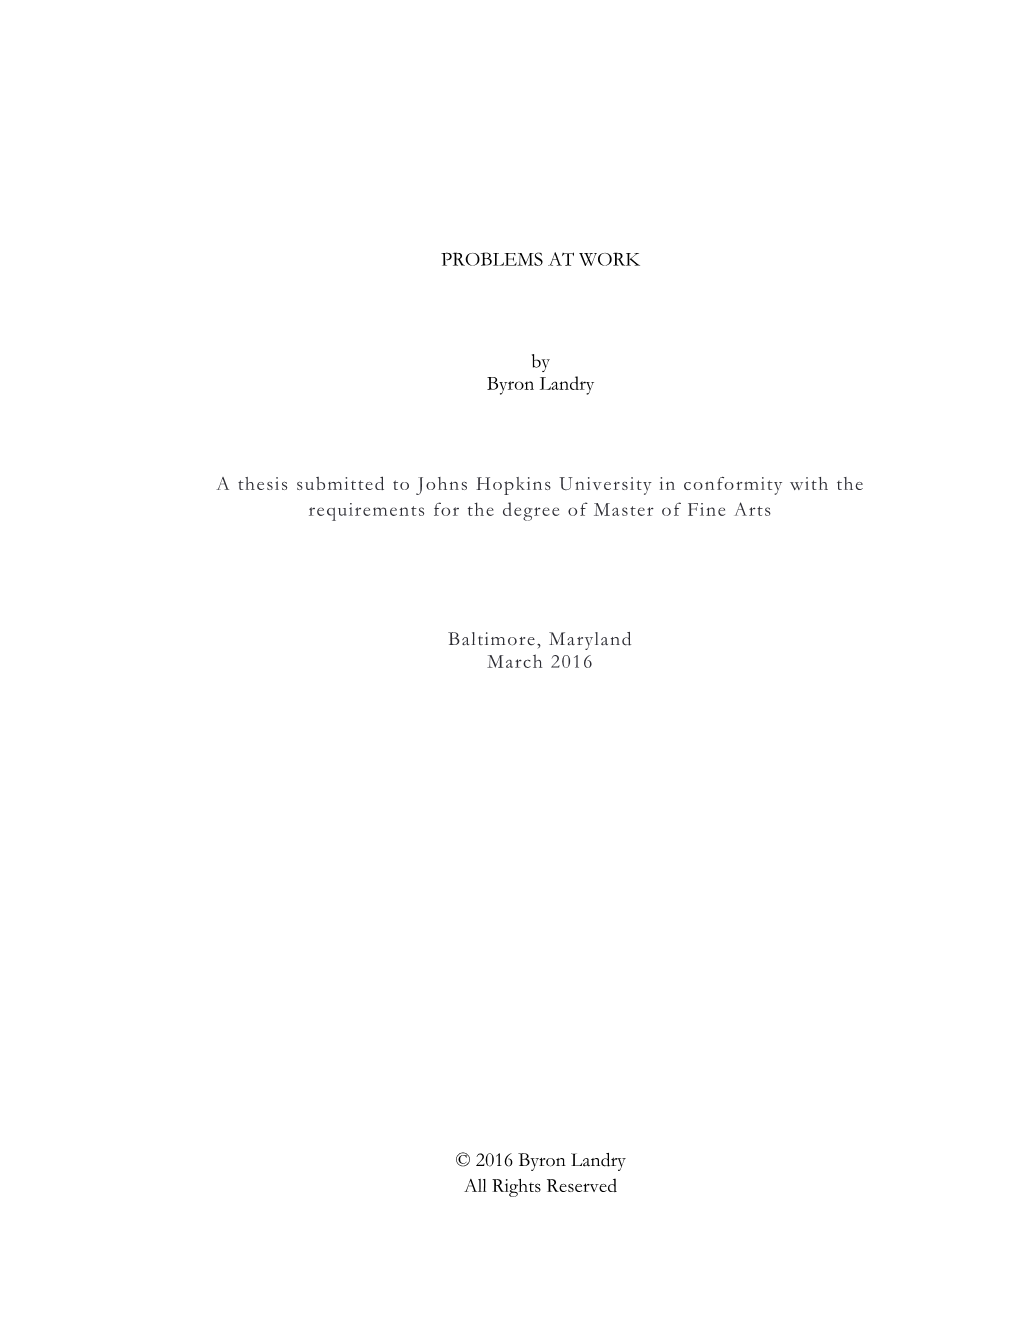 PROBLEMS at WORK by Byron Landry a Thesis Submitted to Johns